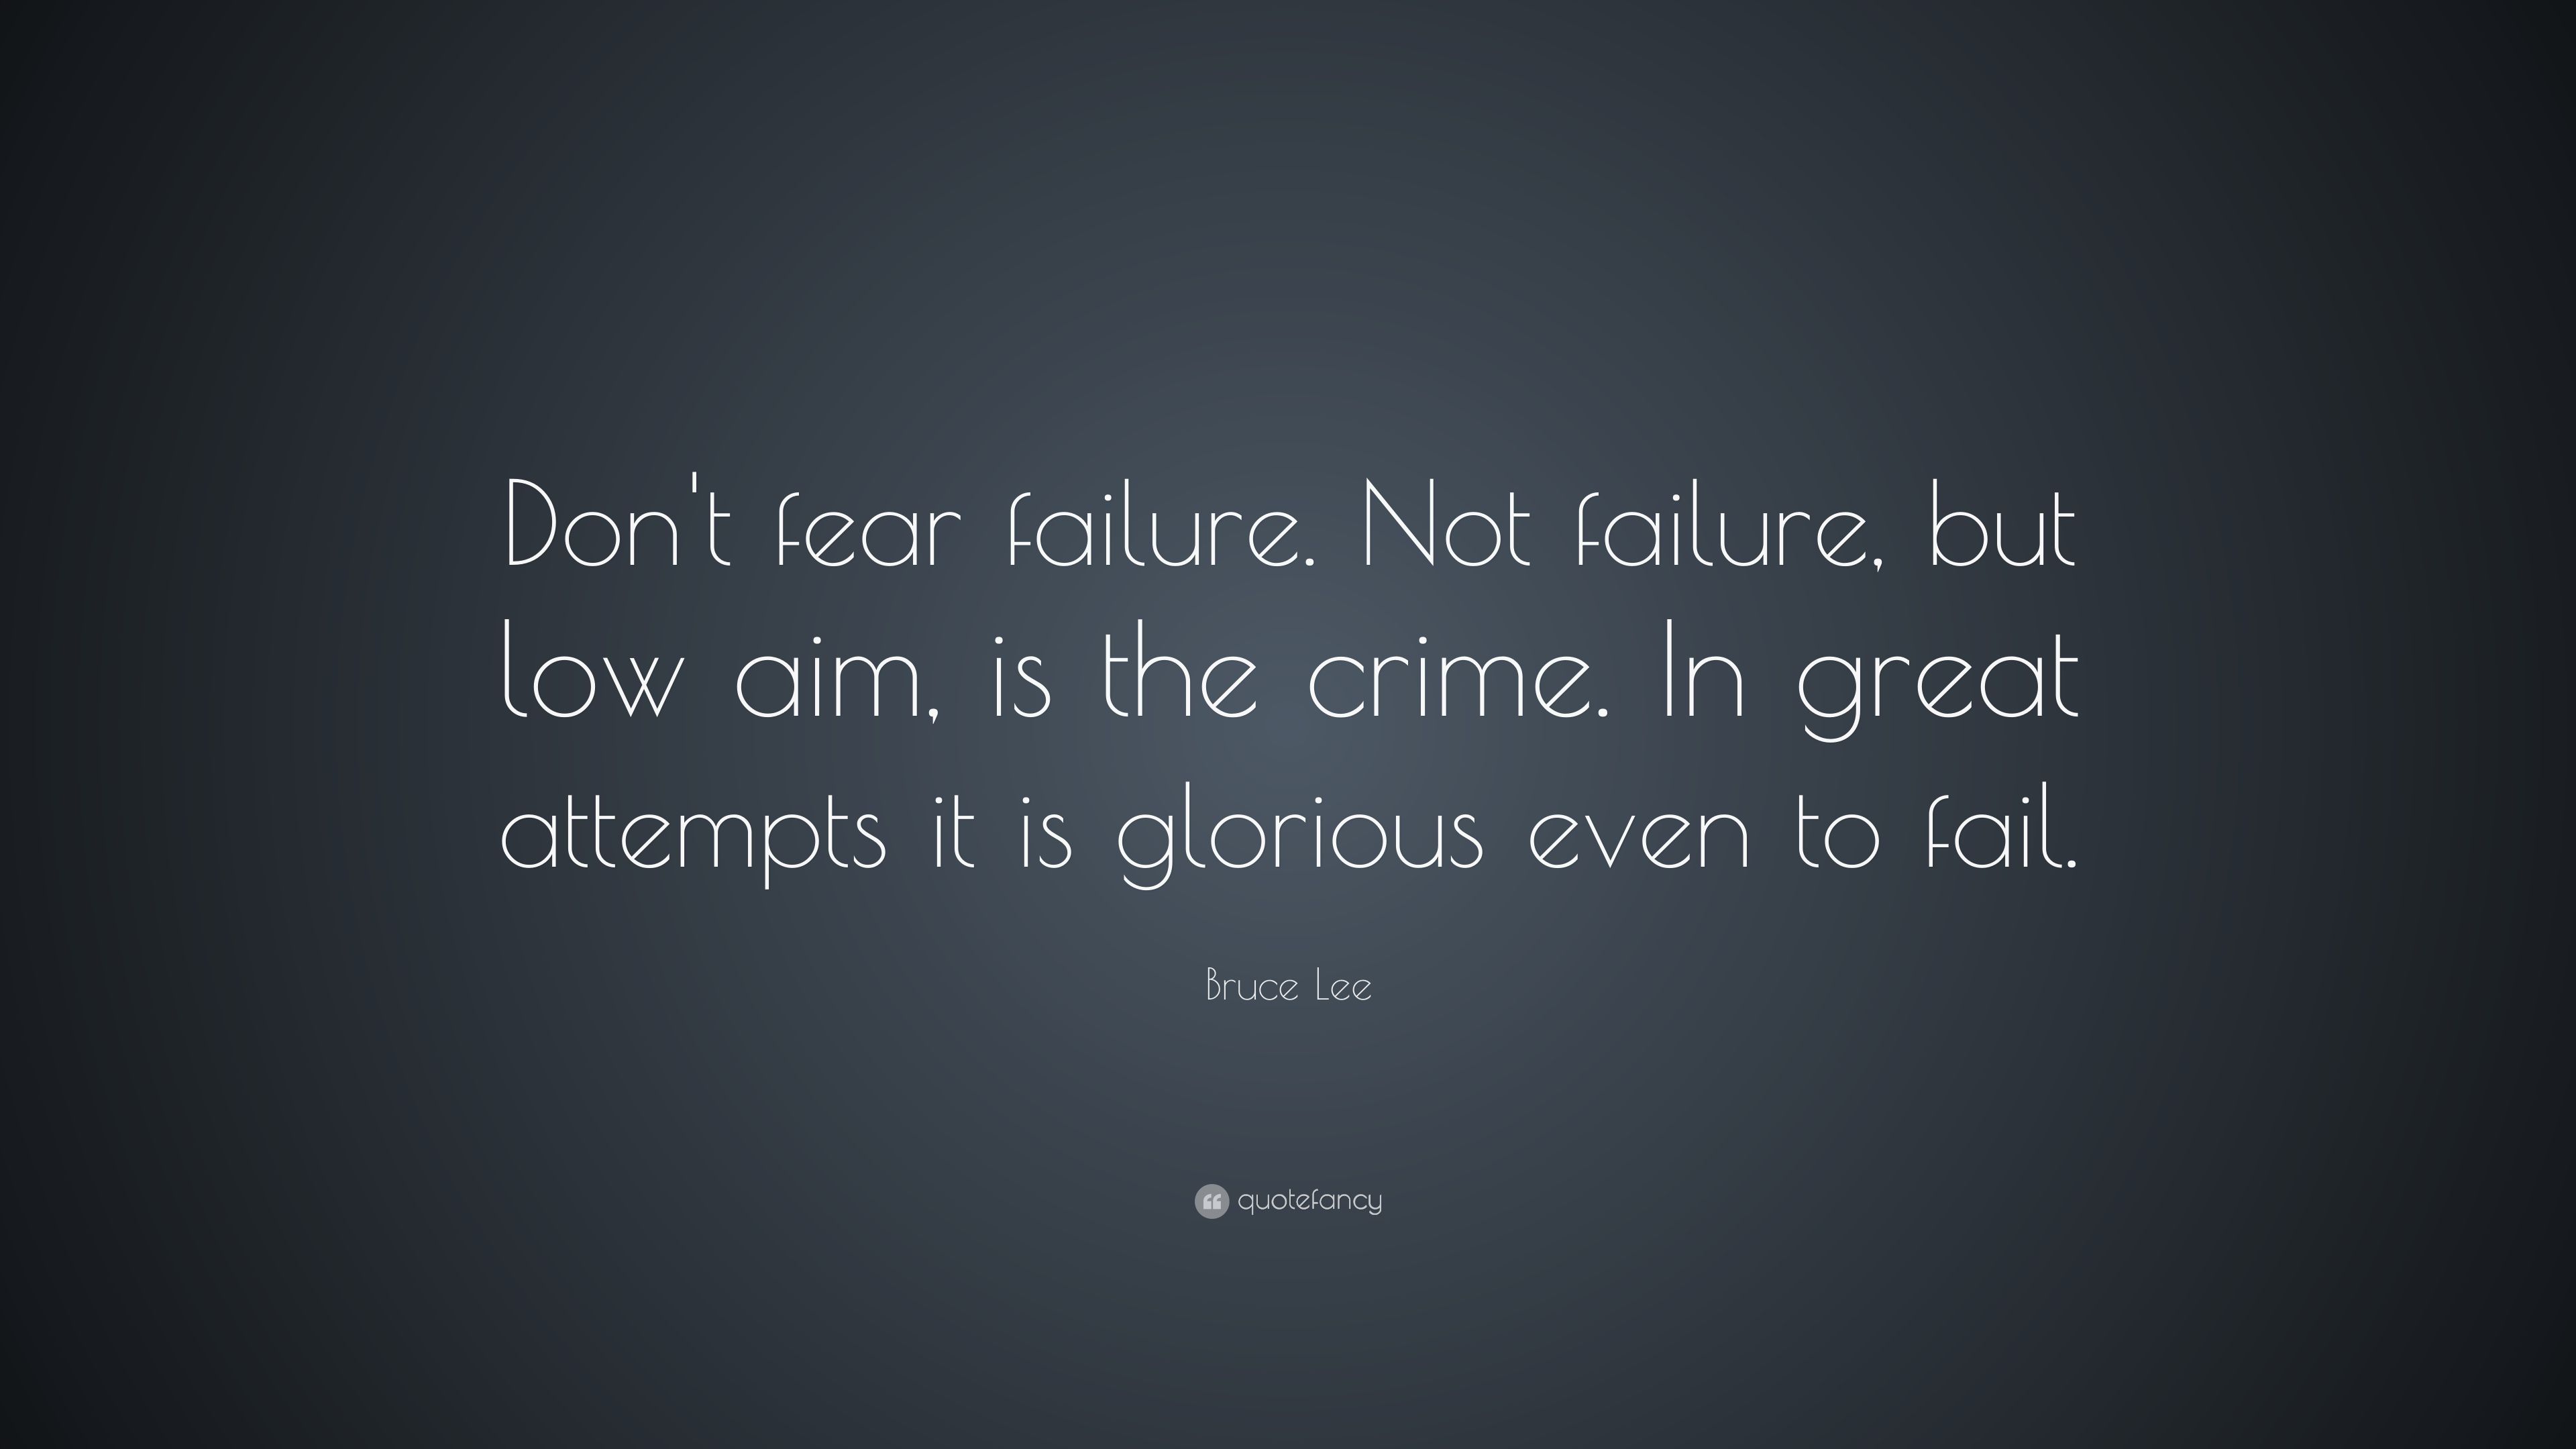 Bruce Lee Quote: “Don't fear failure. Not failure, but low aim, is ...